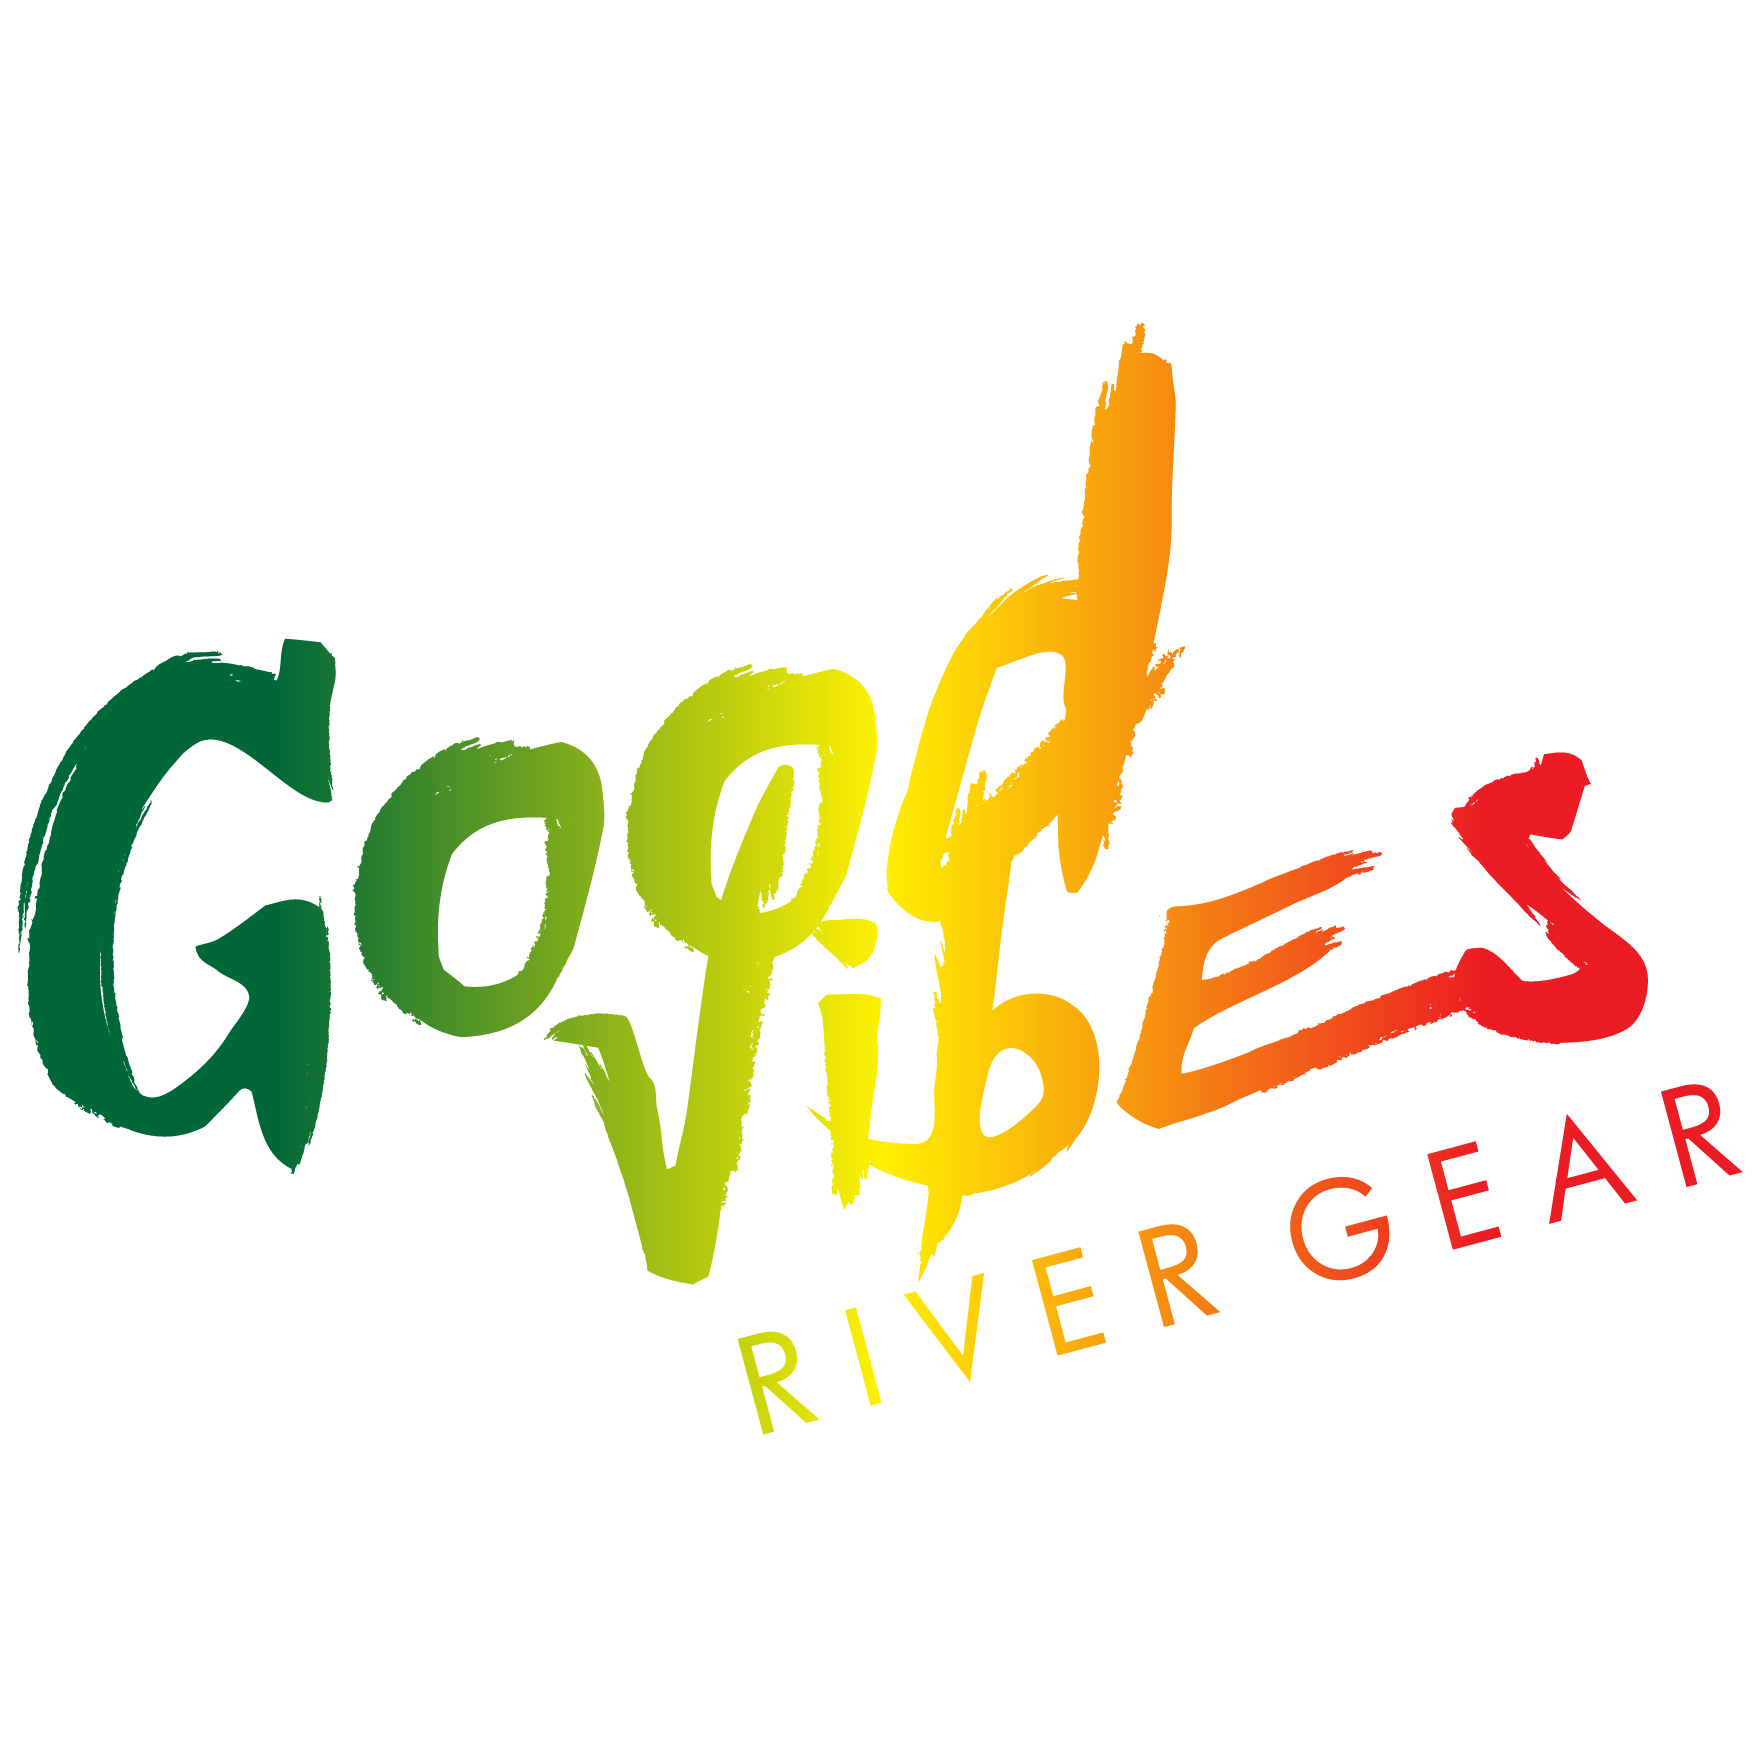 Good Vibes River Gear